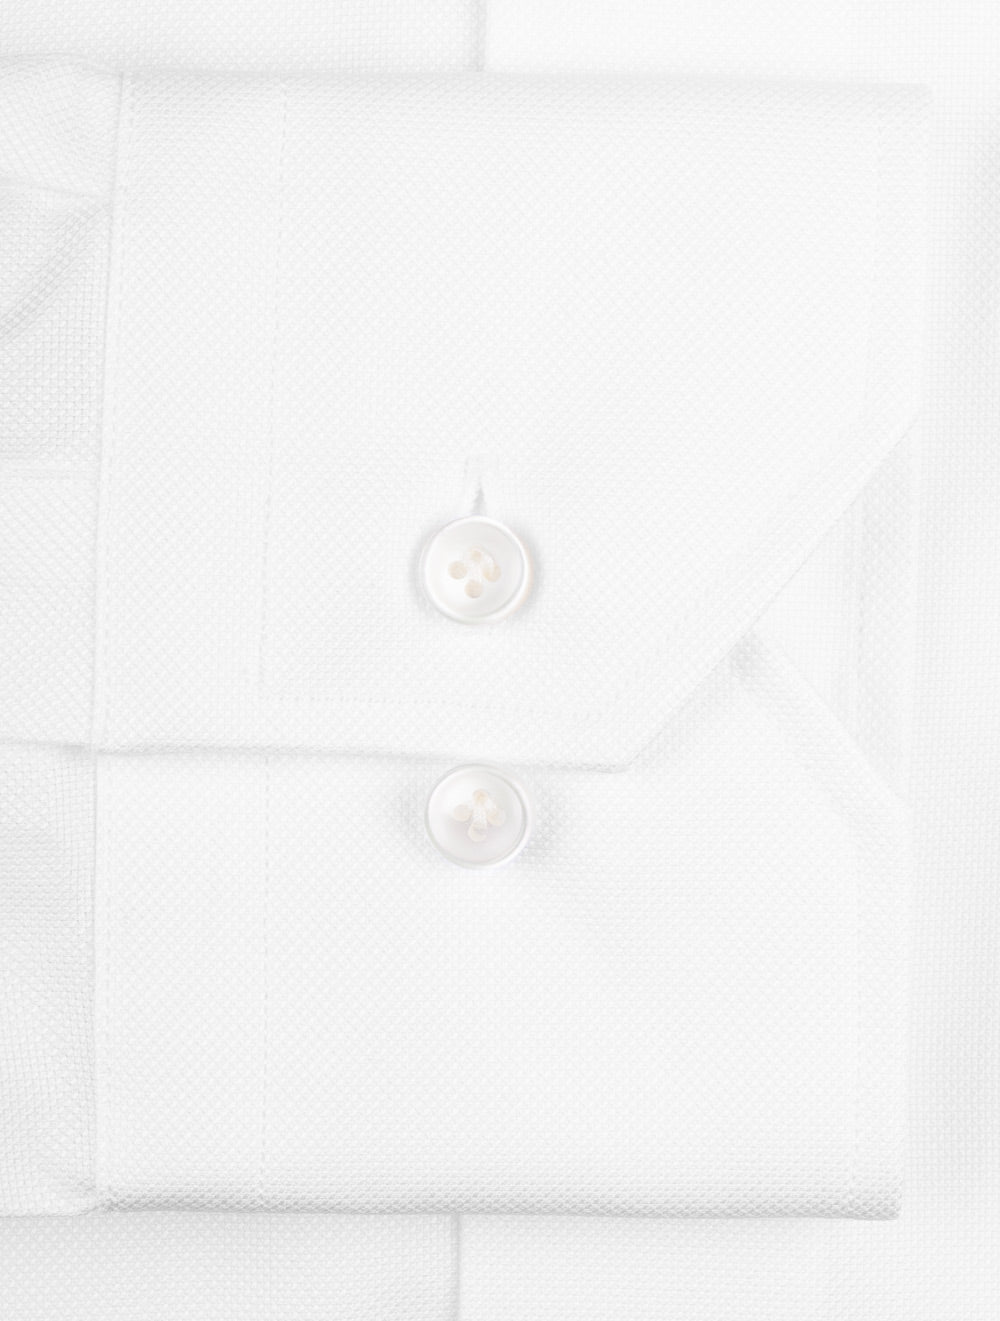 Slim Fit Pinpoint Single Cuff White